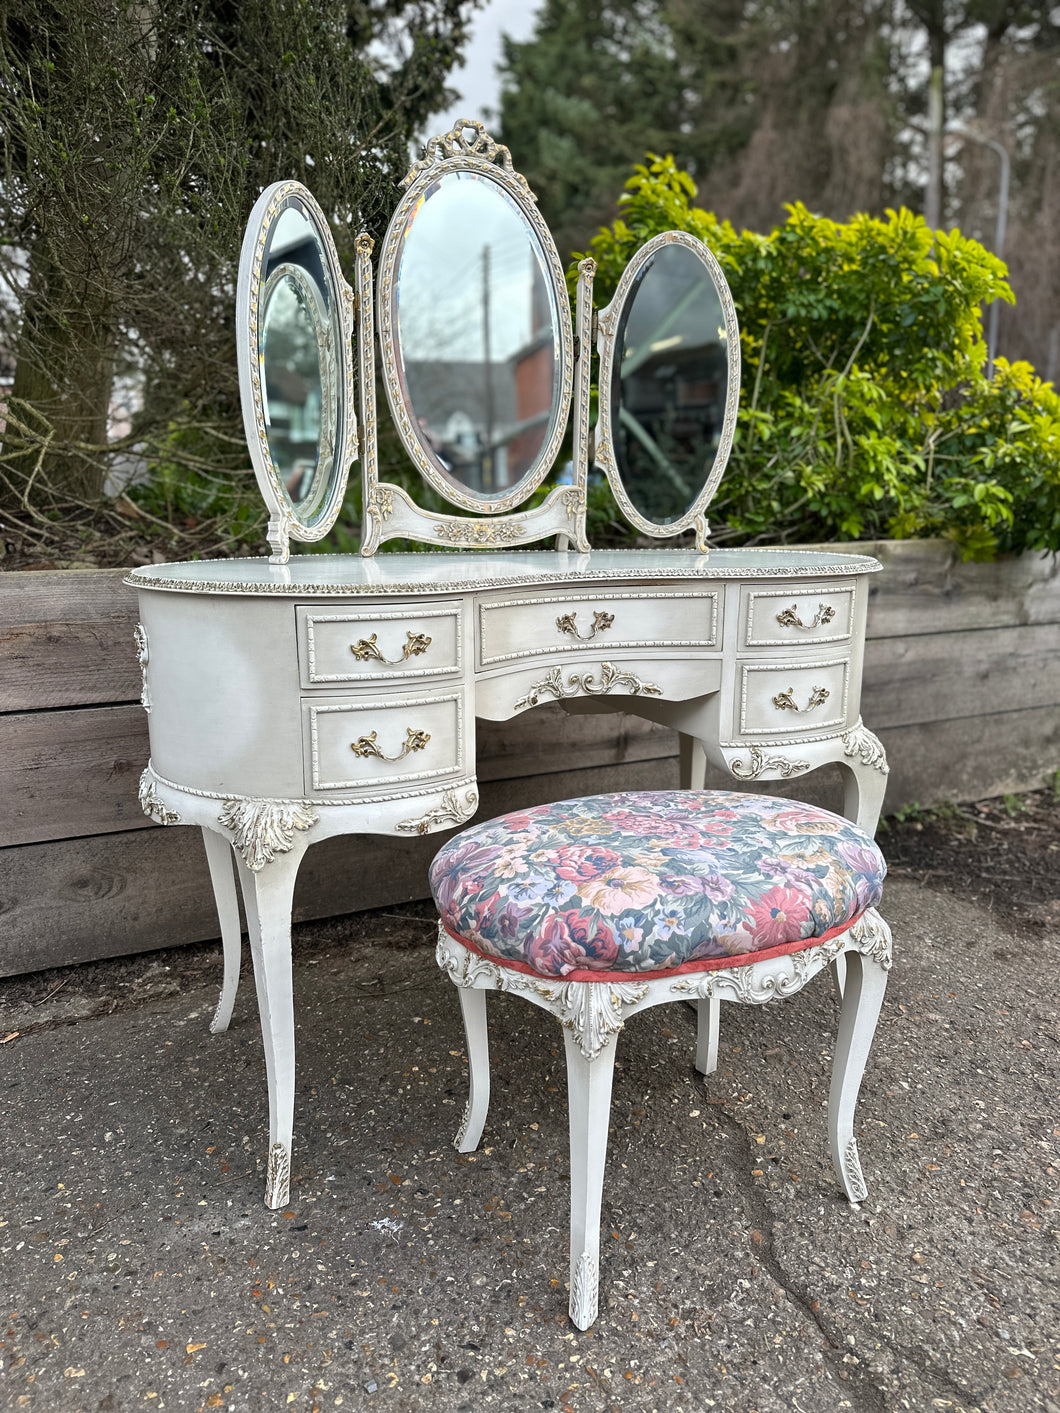 White Painted French Style Ornate Dressing Table With Triptych Mirror And Stool